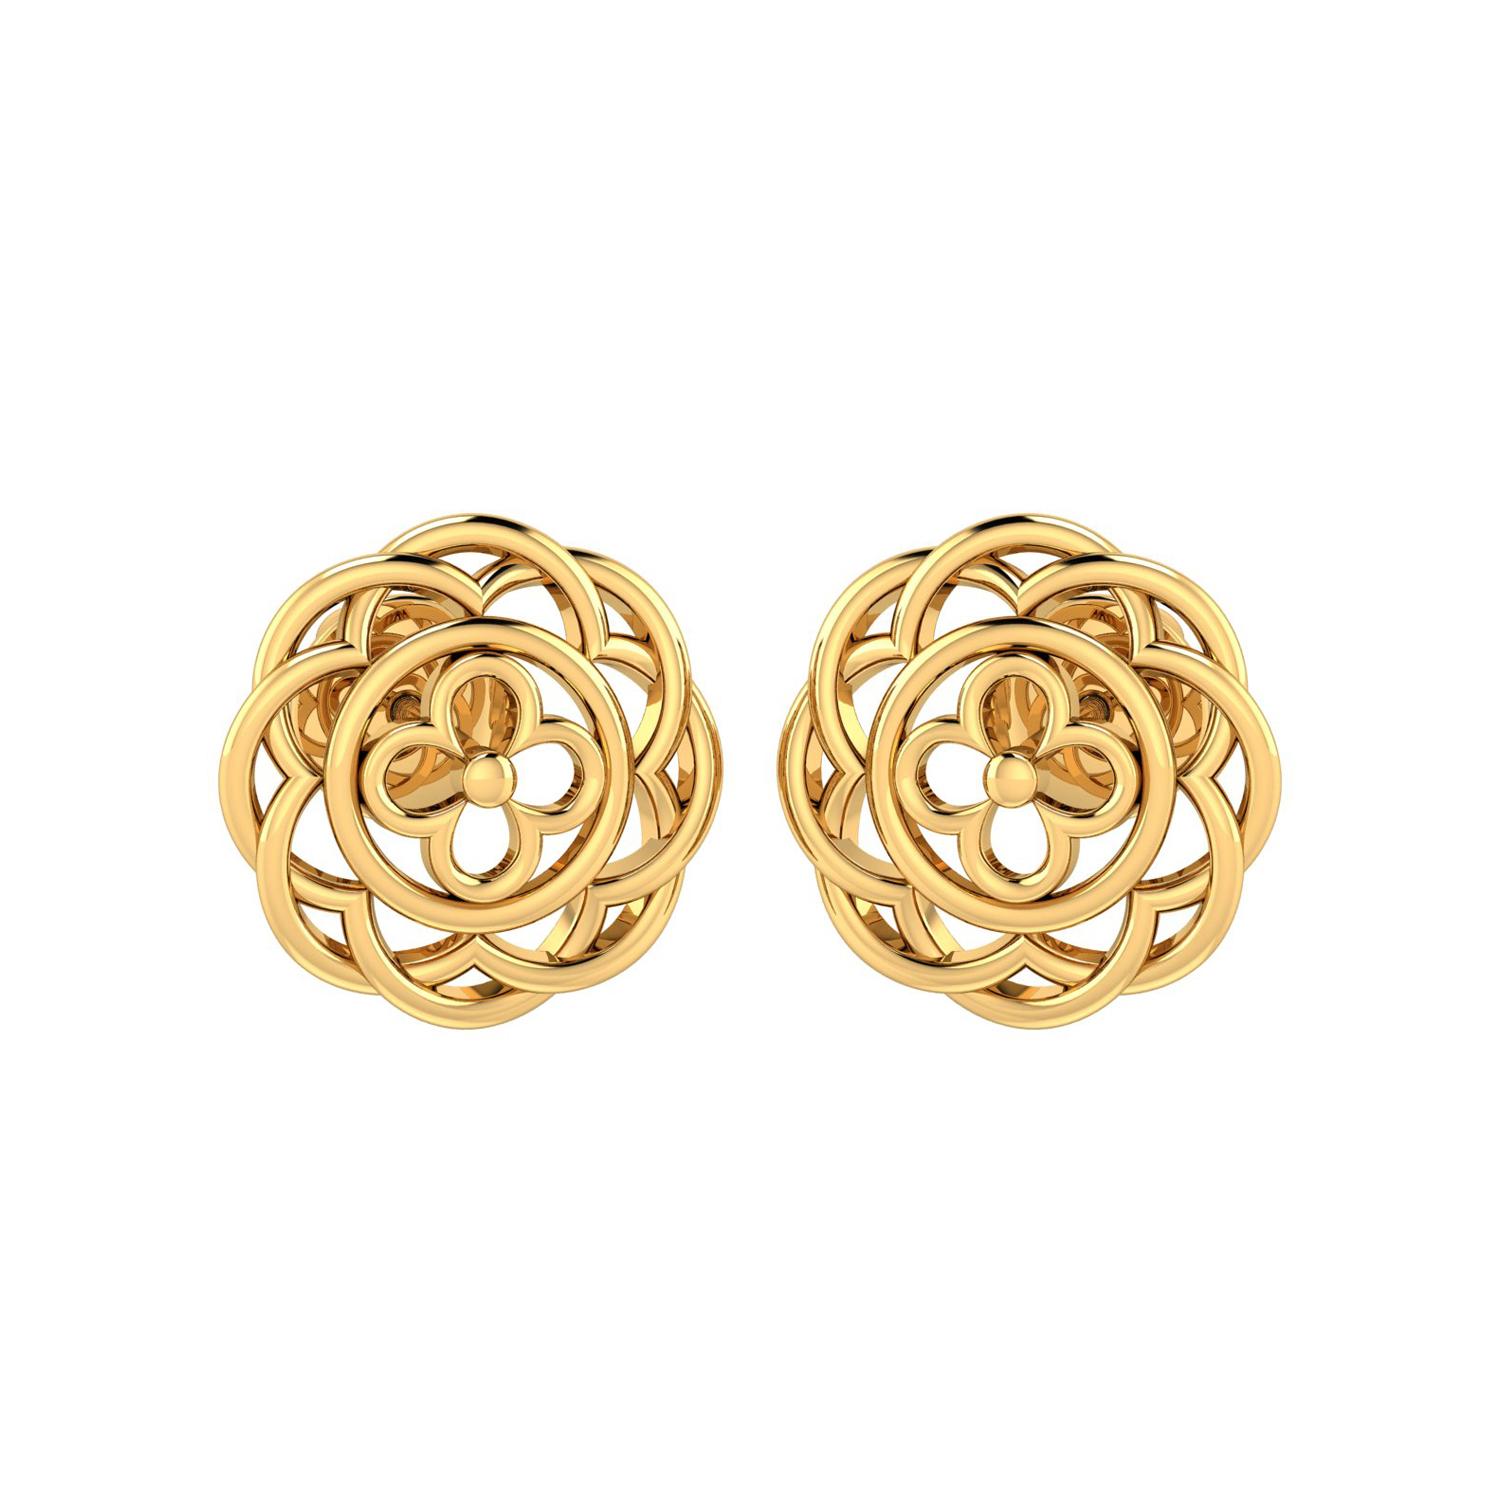 Home Gold Gold Earrings Gold Studs